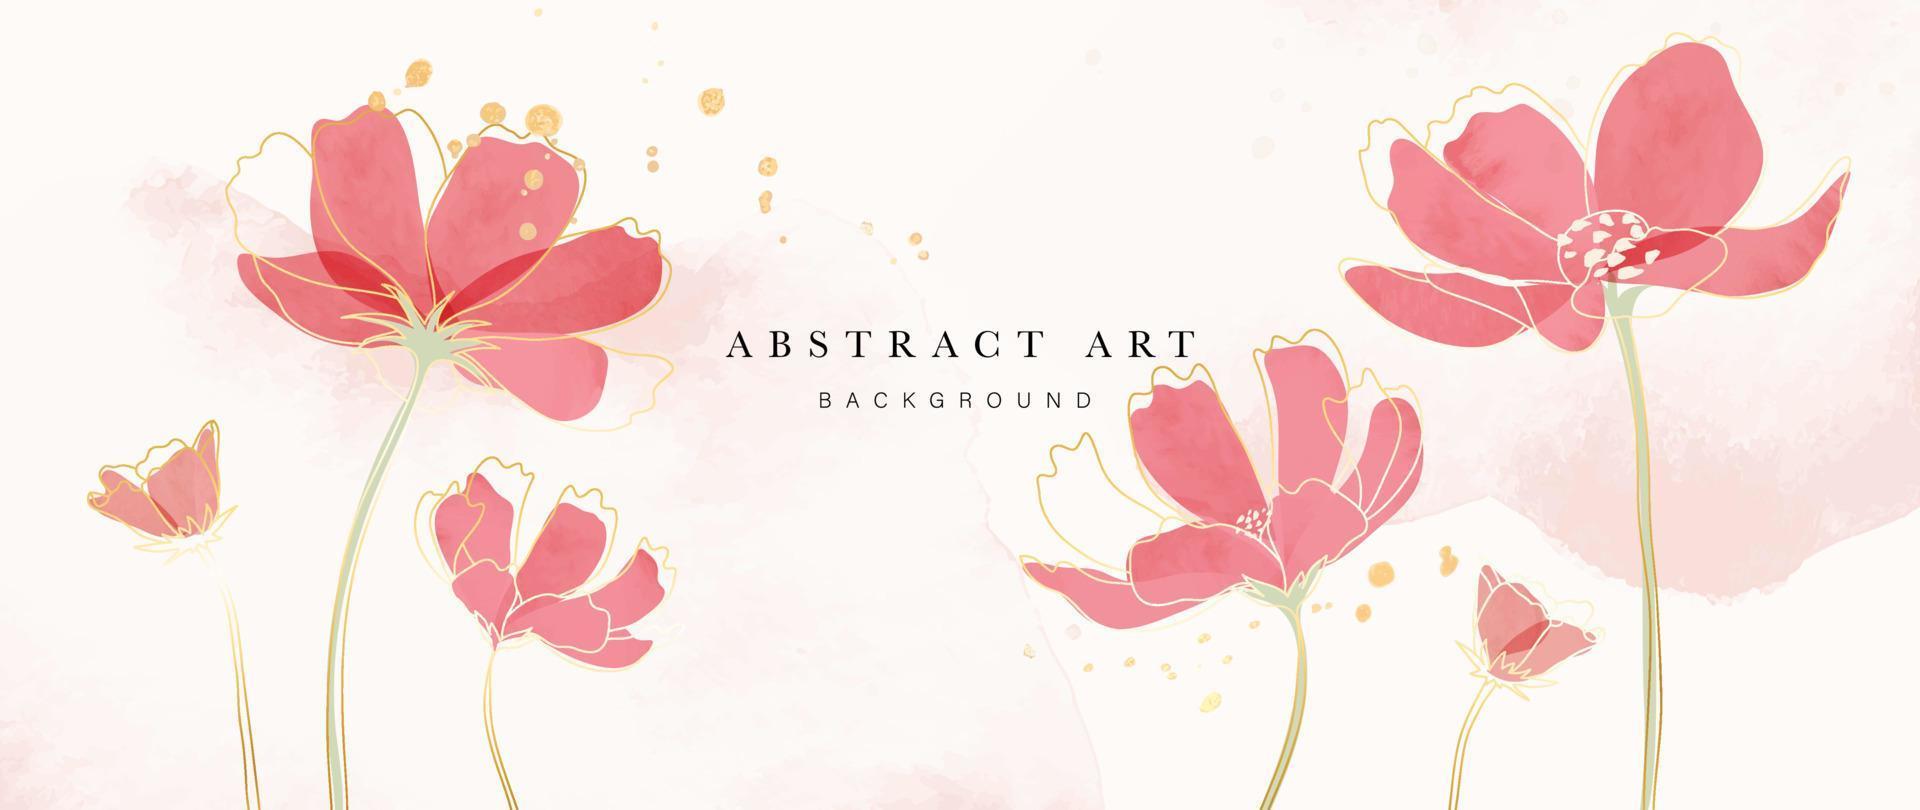 Abstract art background vector. Luxury watercolor flowers with gold line art and ink splatter texture background. Art design illustration for wallpaper, poster, banner card, print, web and packaging. vector